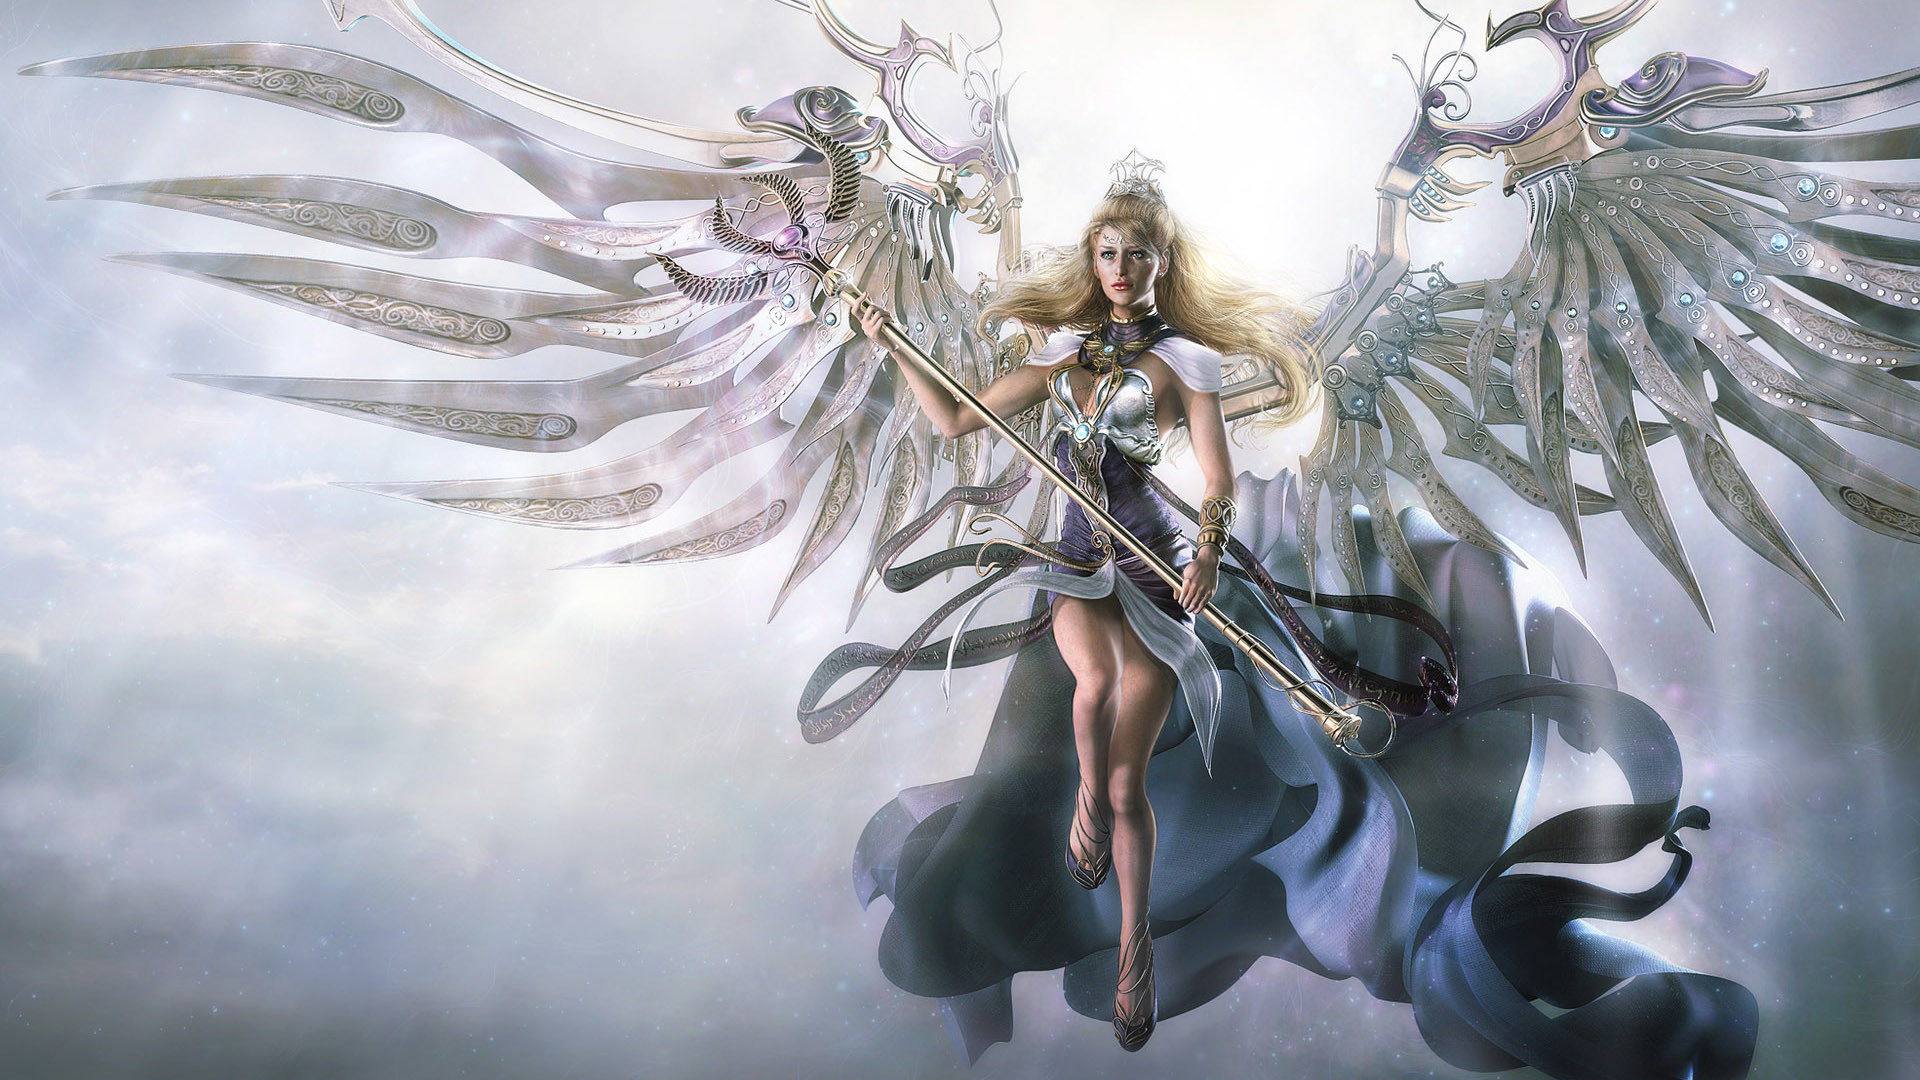 1920x1080 Angels HD wallpaper - Great art of Angels ready to set as background